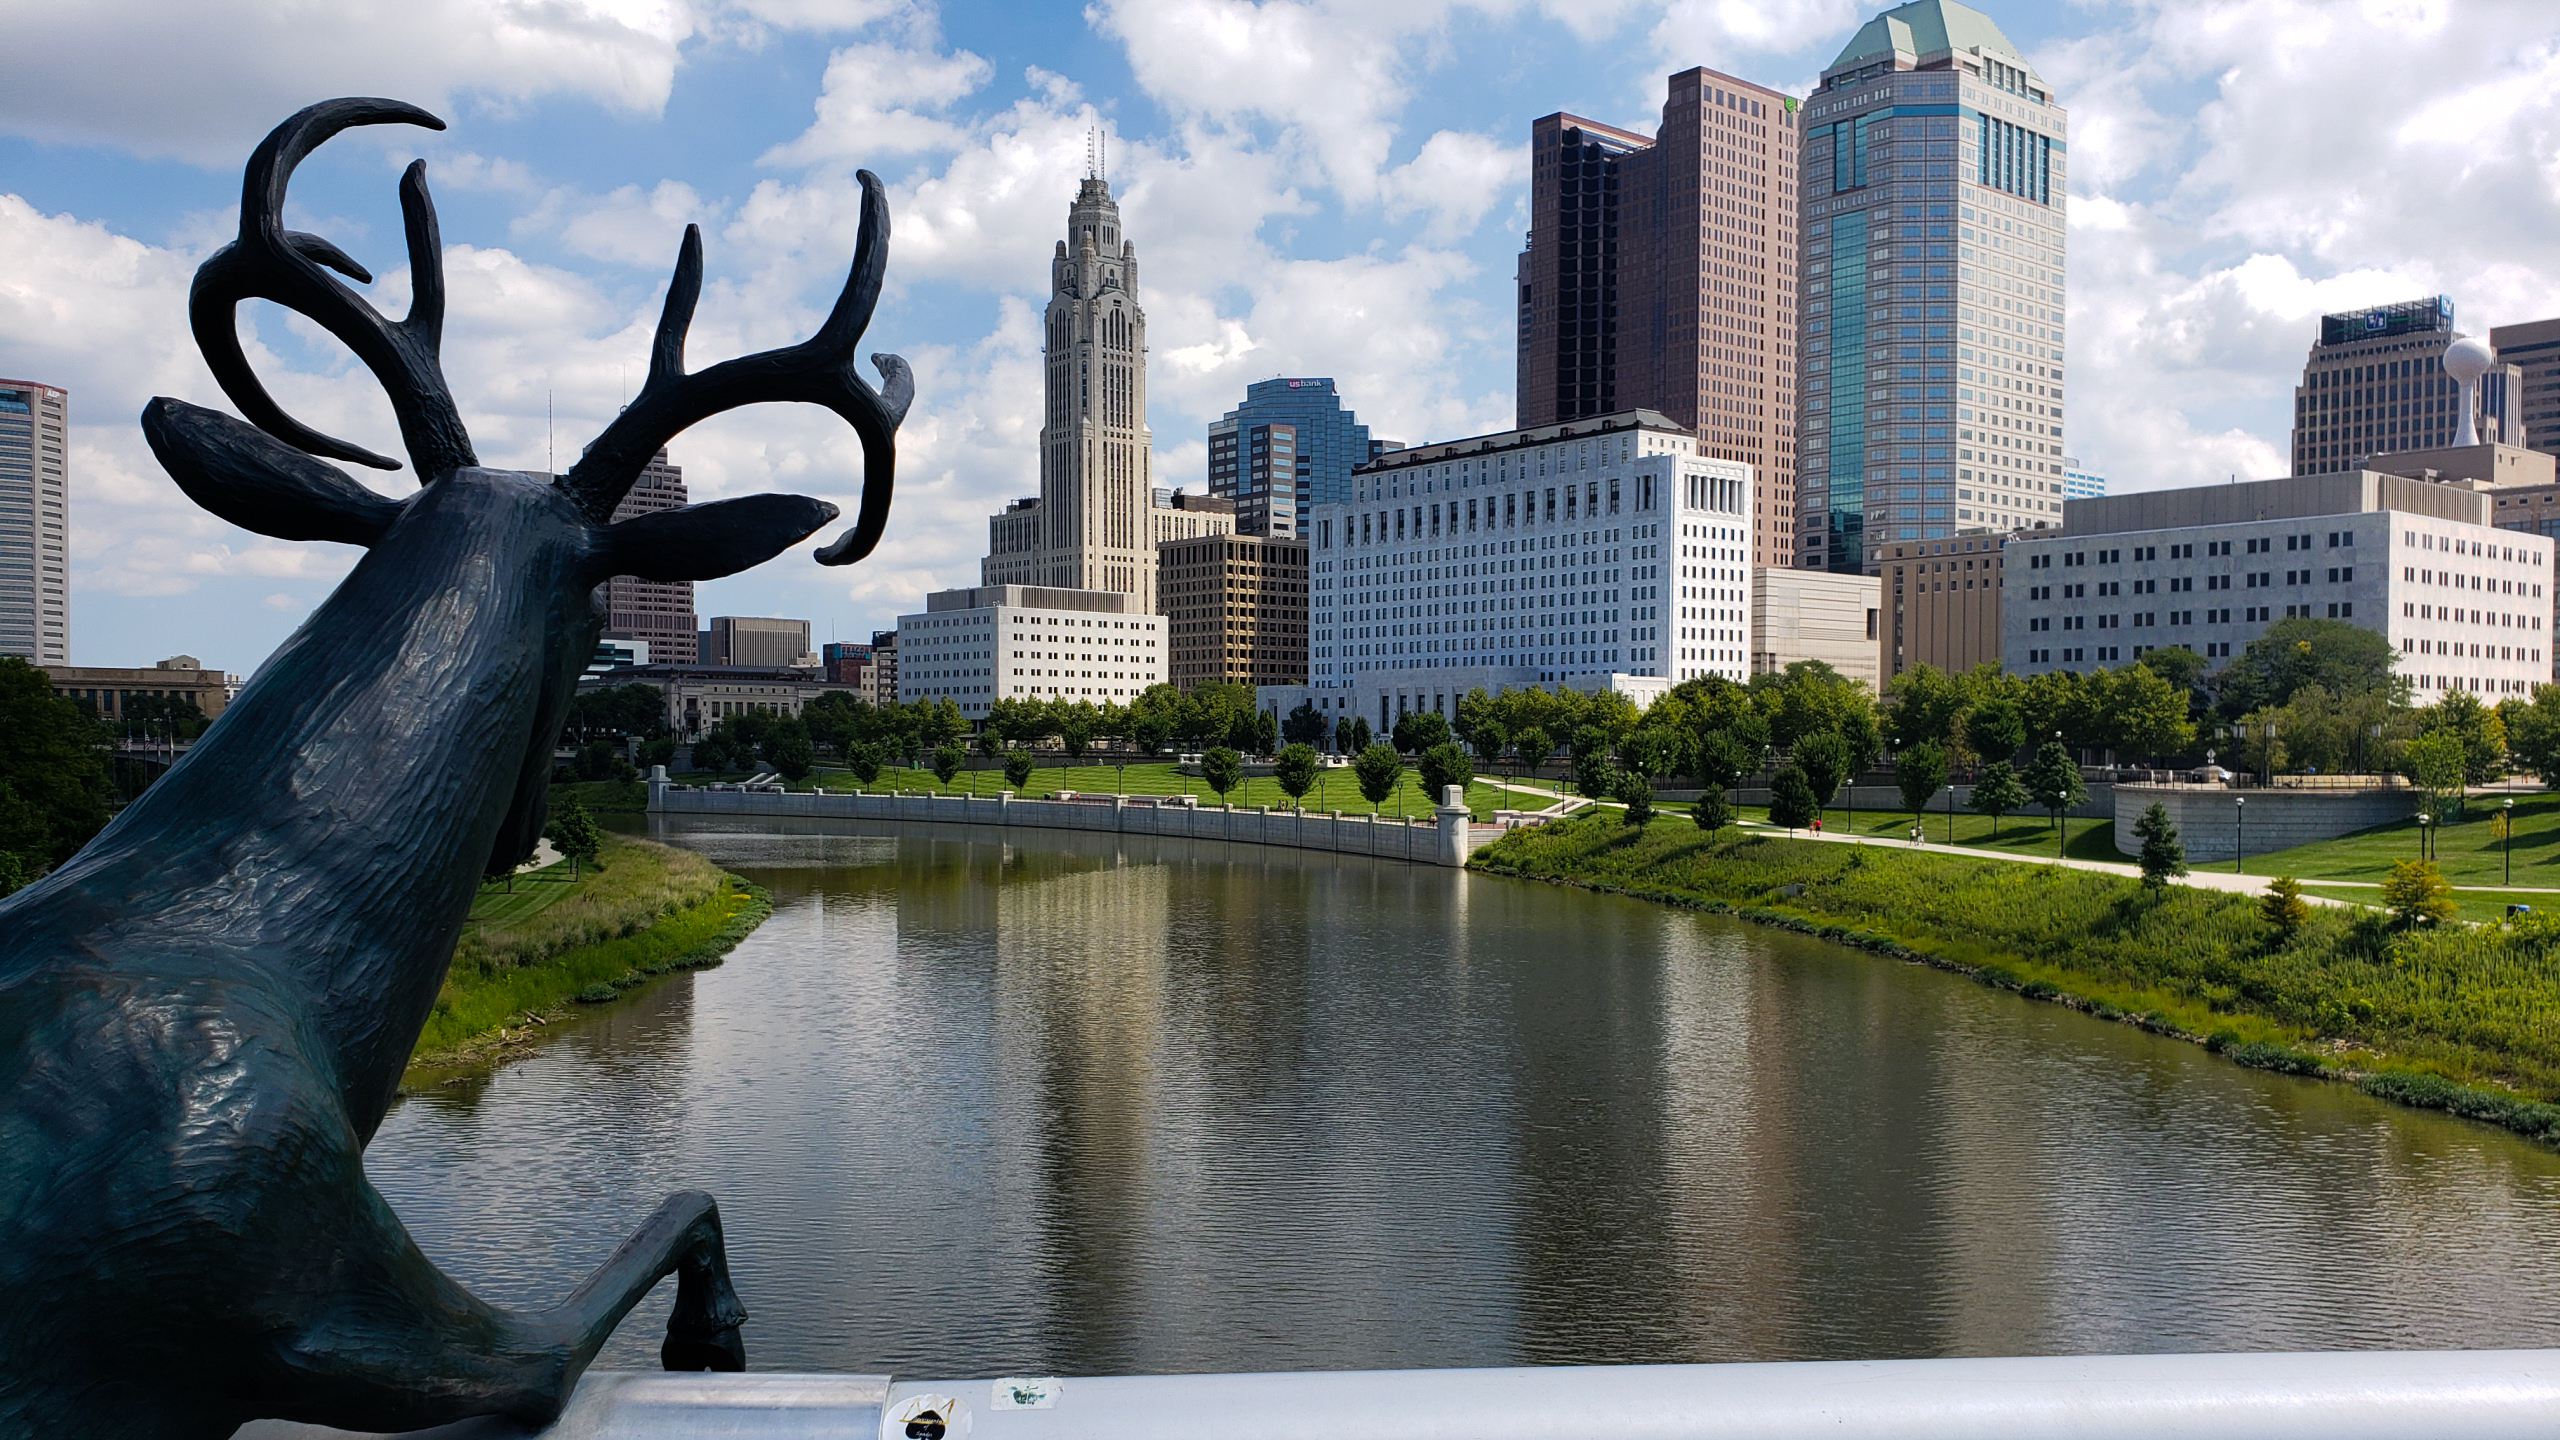 Downtown Columbus from a deer's perspective